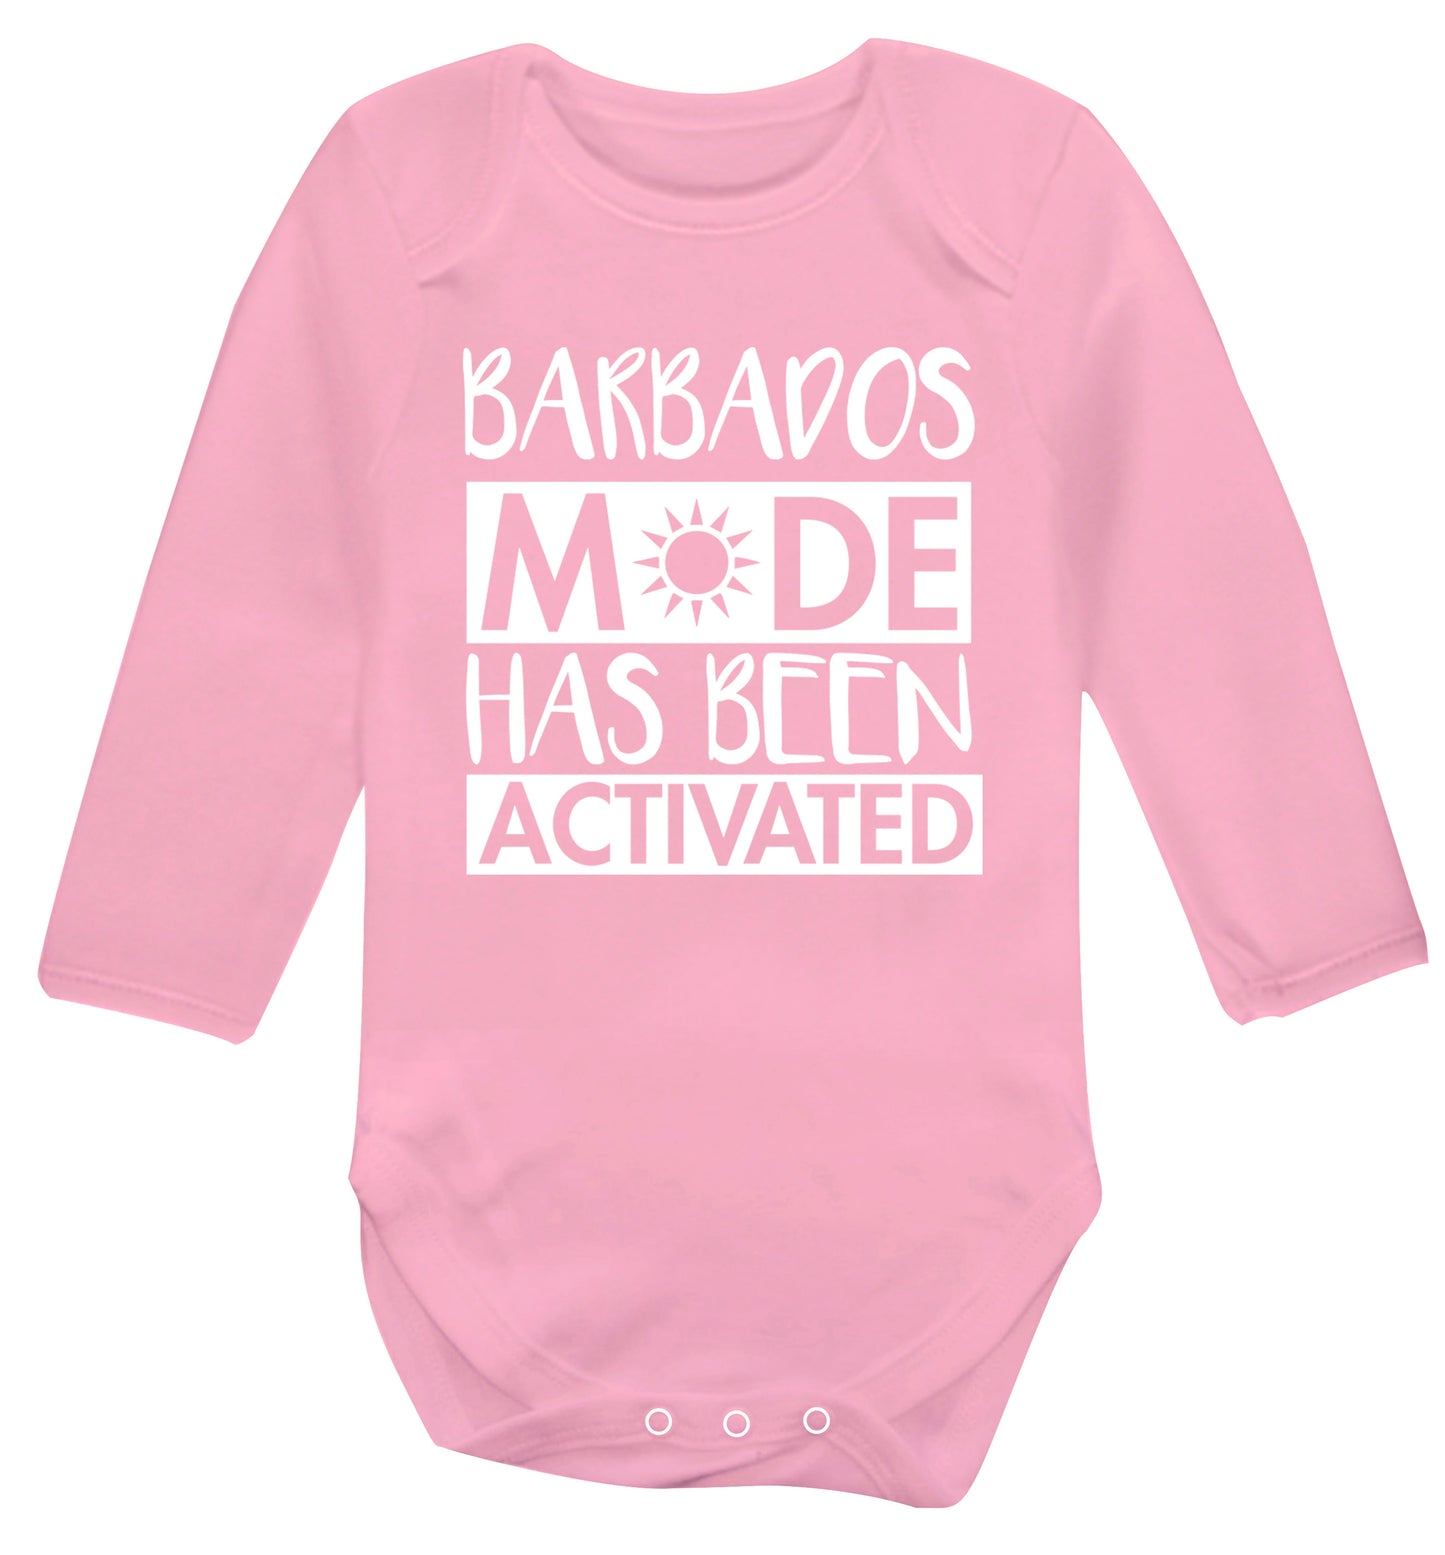 Barbados mode has been activated Baby Vest long sleeved pale pink 6-12 months